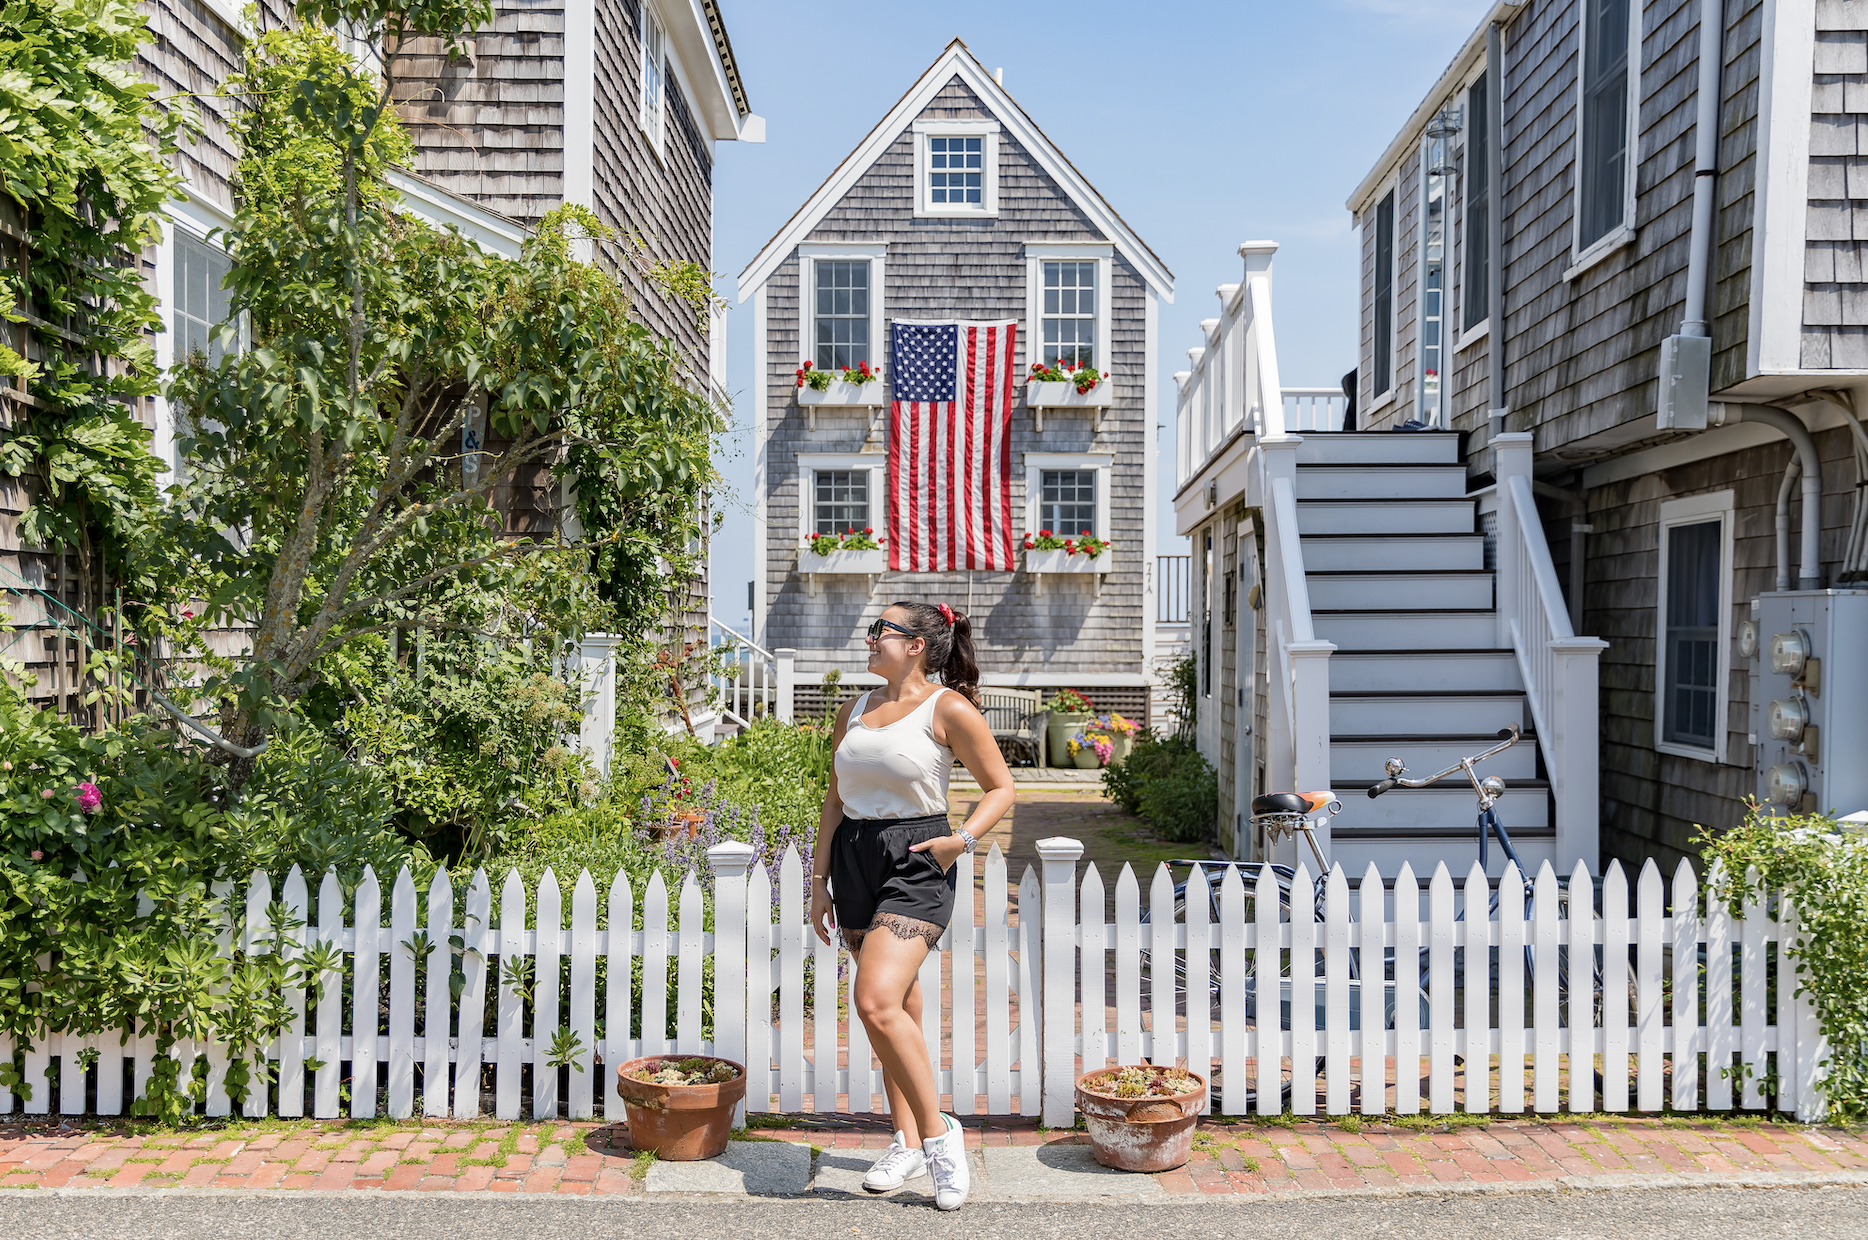 36 Hours in Provincetown, MA